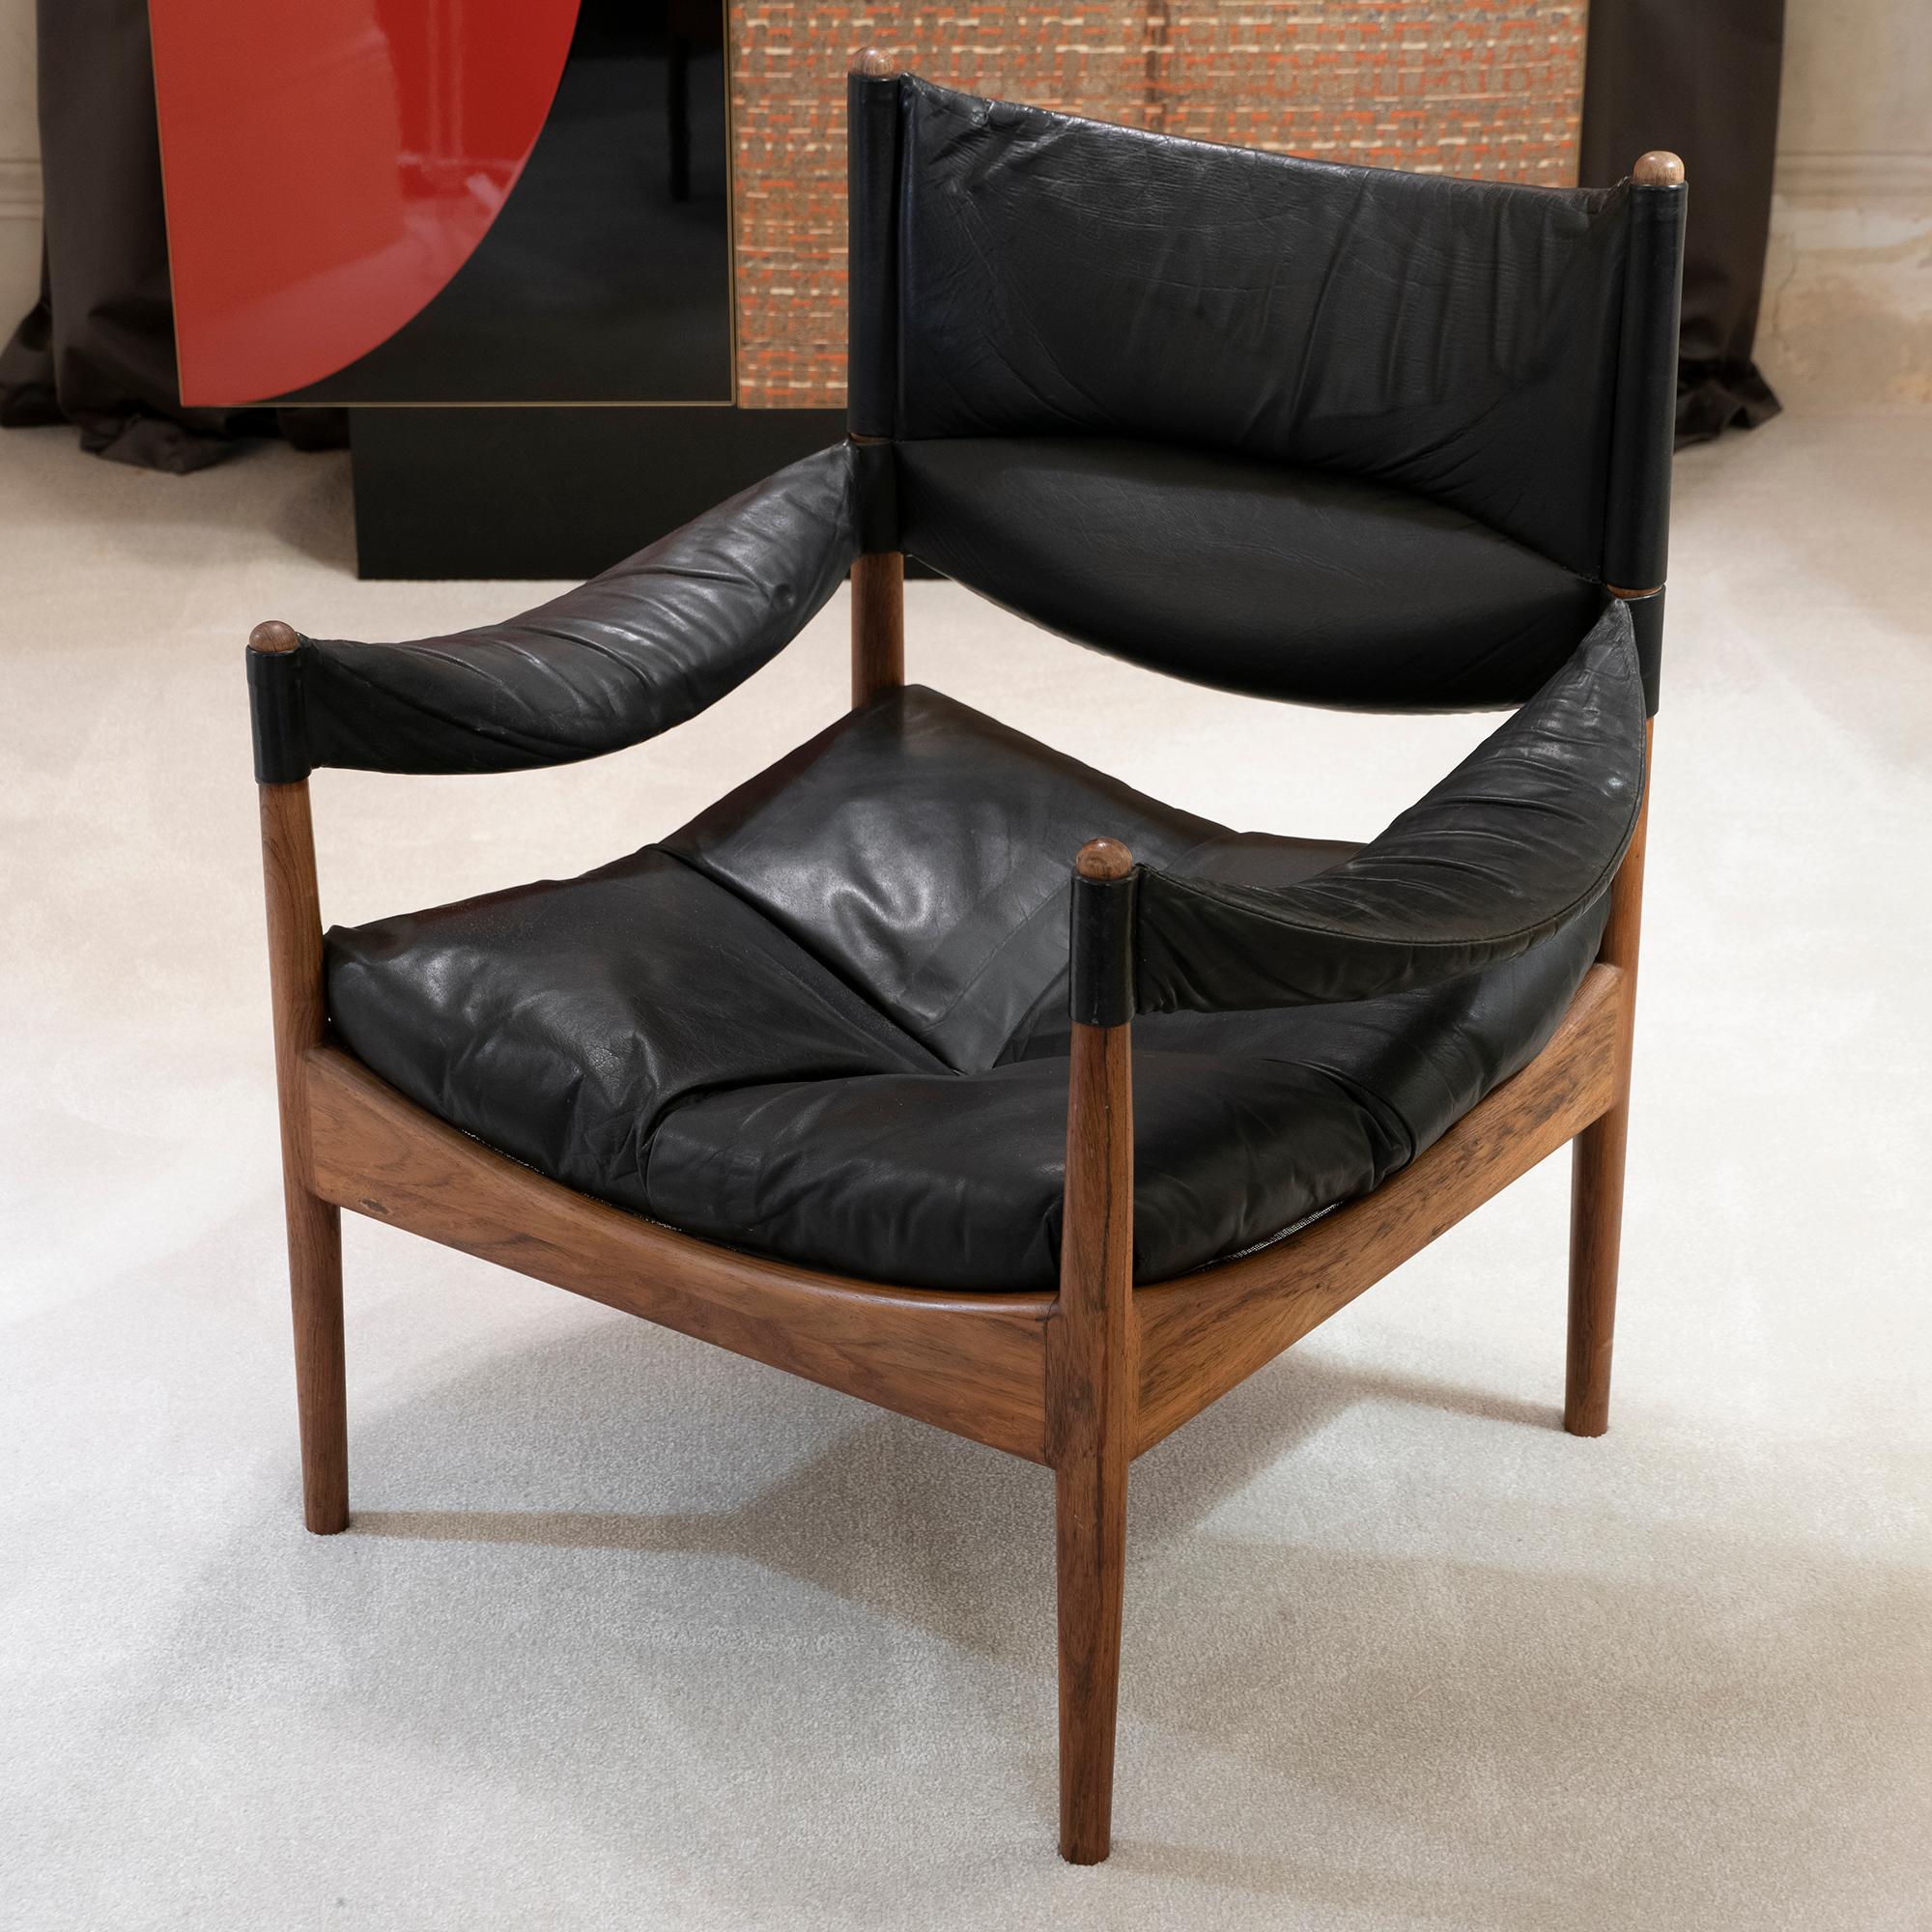 Danish High Back Lounge Chairs by Kristian Vedel Made by Søren Willadsen, 1963